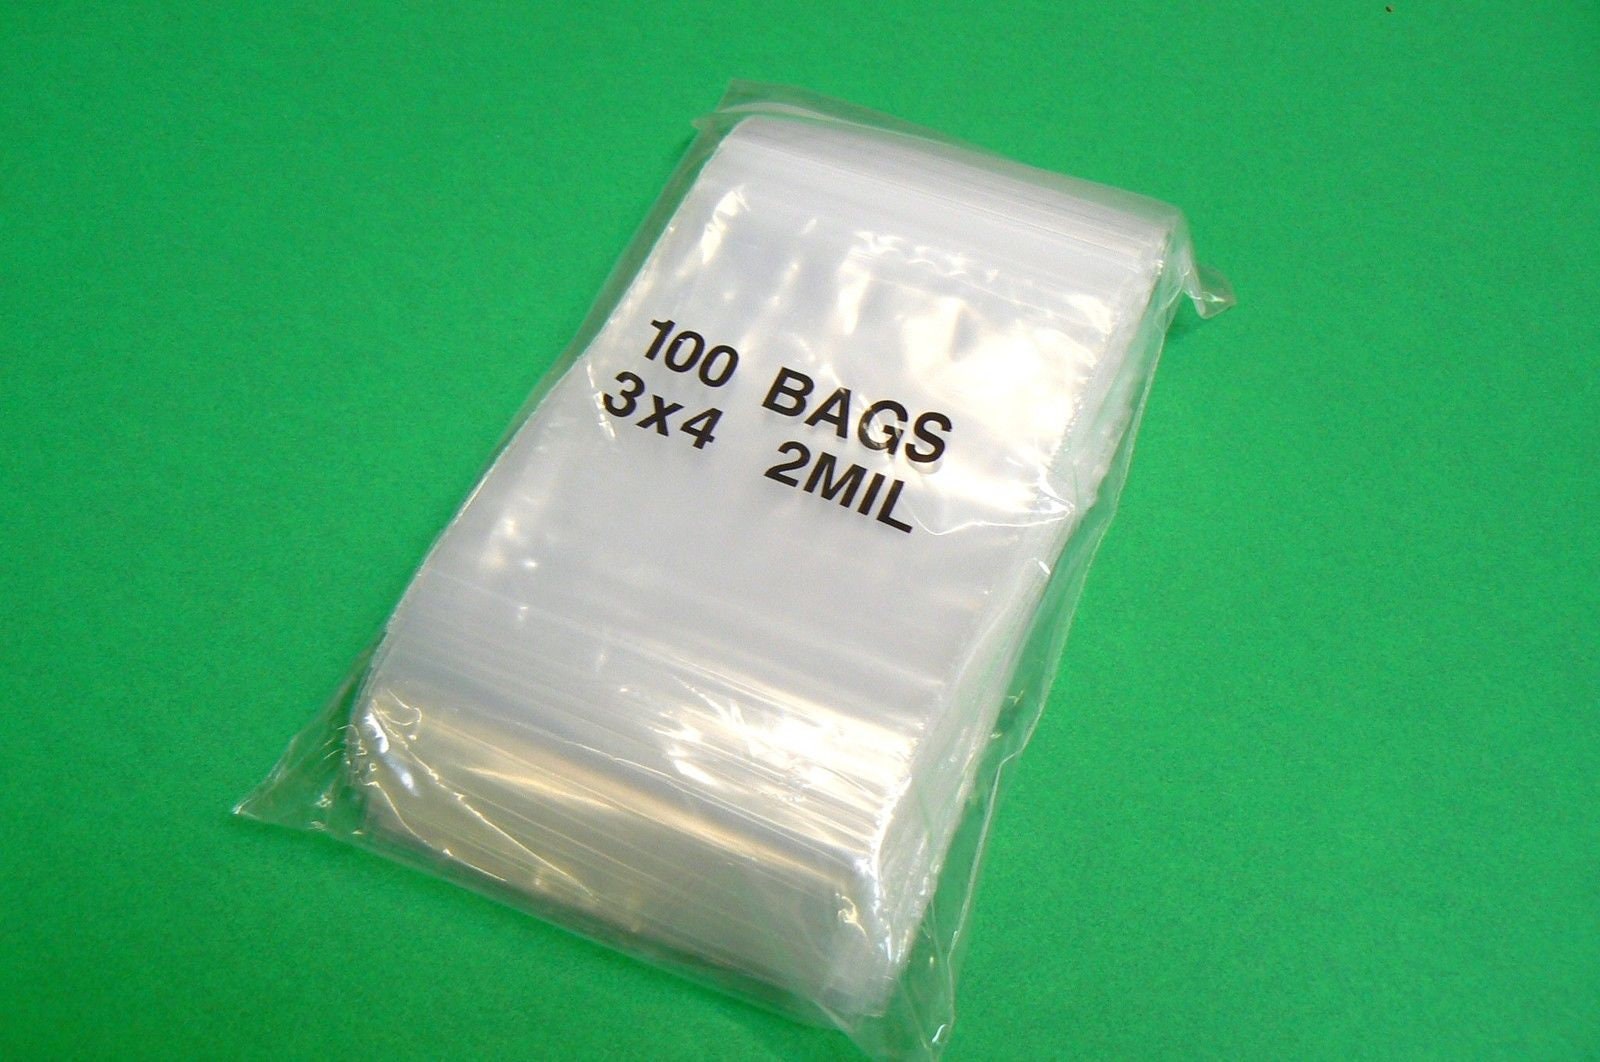 120 Ct Clear Poly Bags Reclosable Top Zip Seal Baggies Plastic Assorted  Sizes 